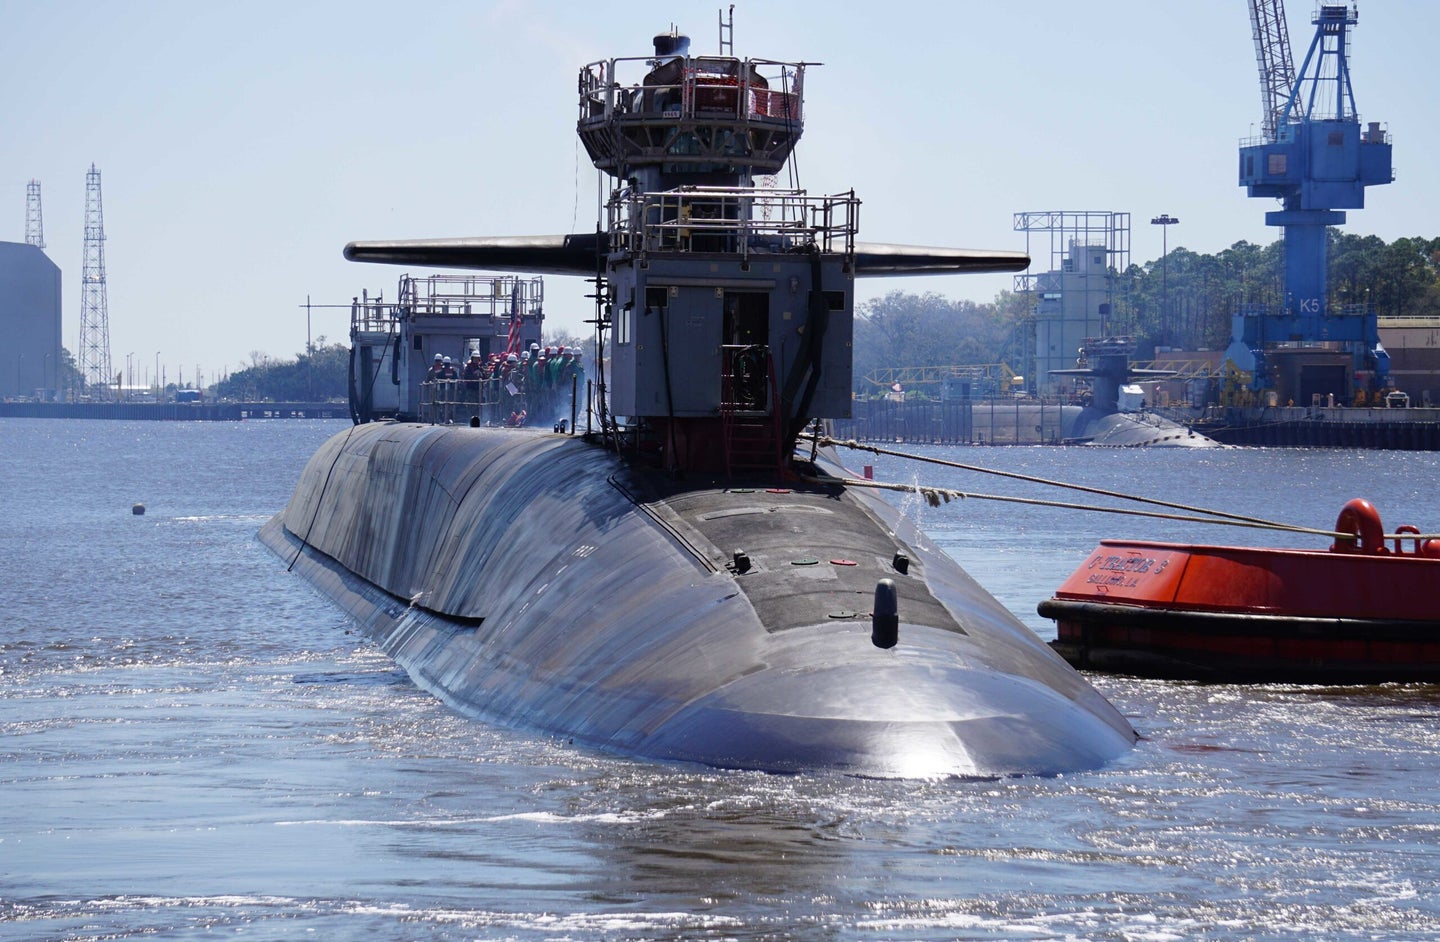 The Ohio-class guided-missile submarine USS Georgia (SSGN 729) exits the dry dock at Naval Submarine Base Kings Bay, Ga., following an extended refit period. 